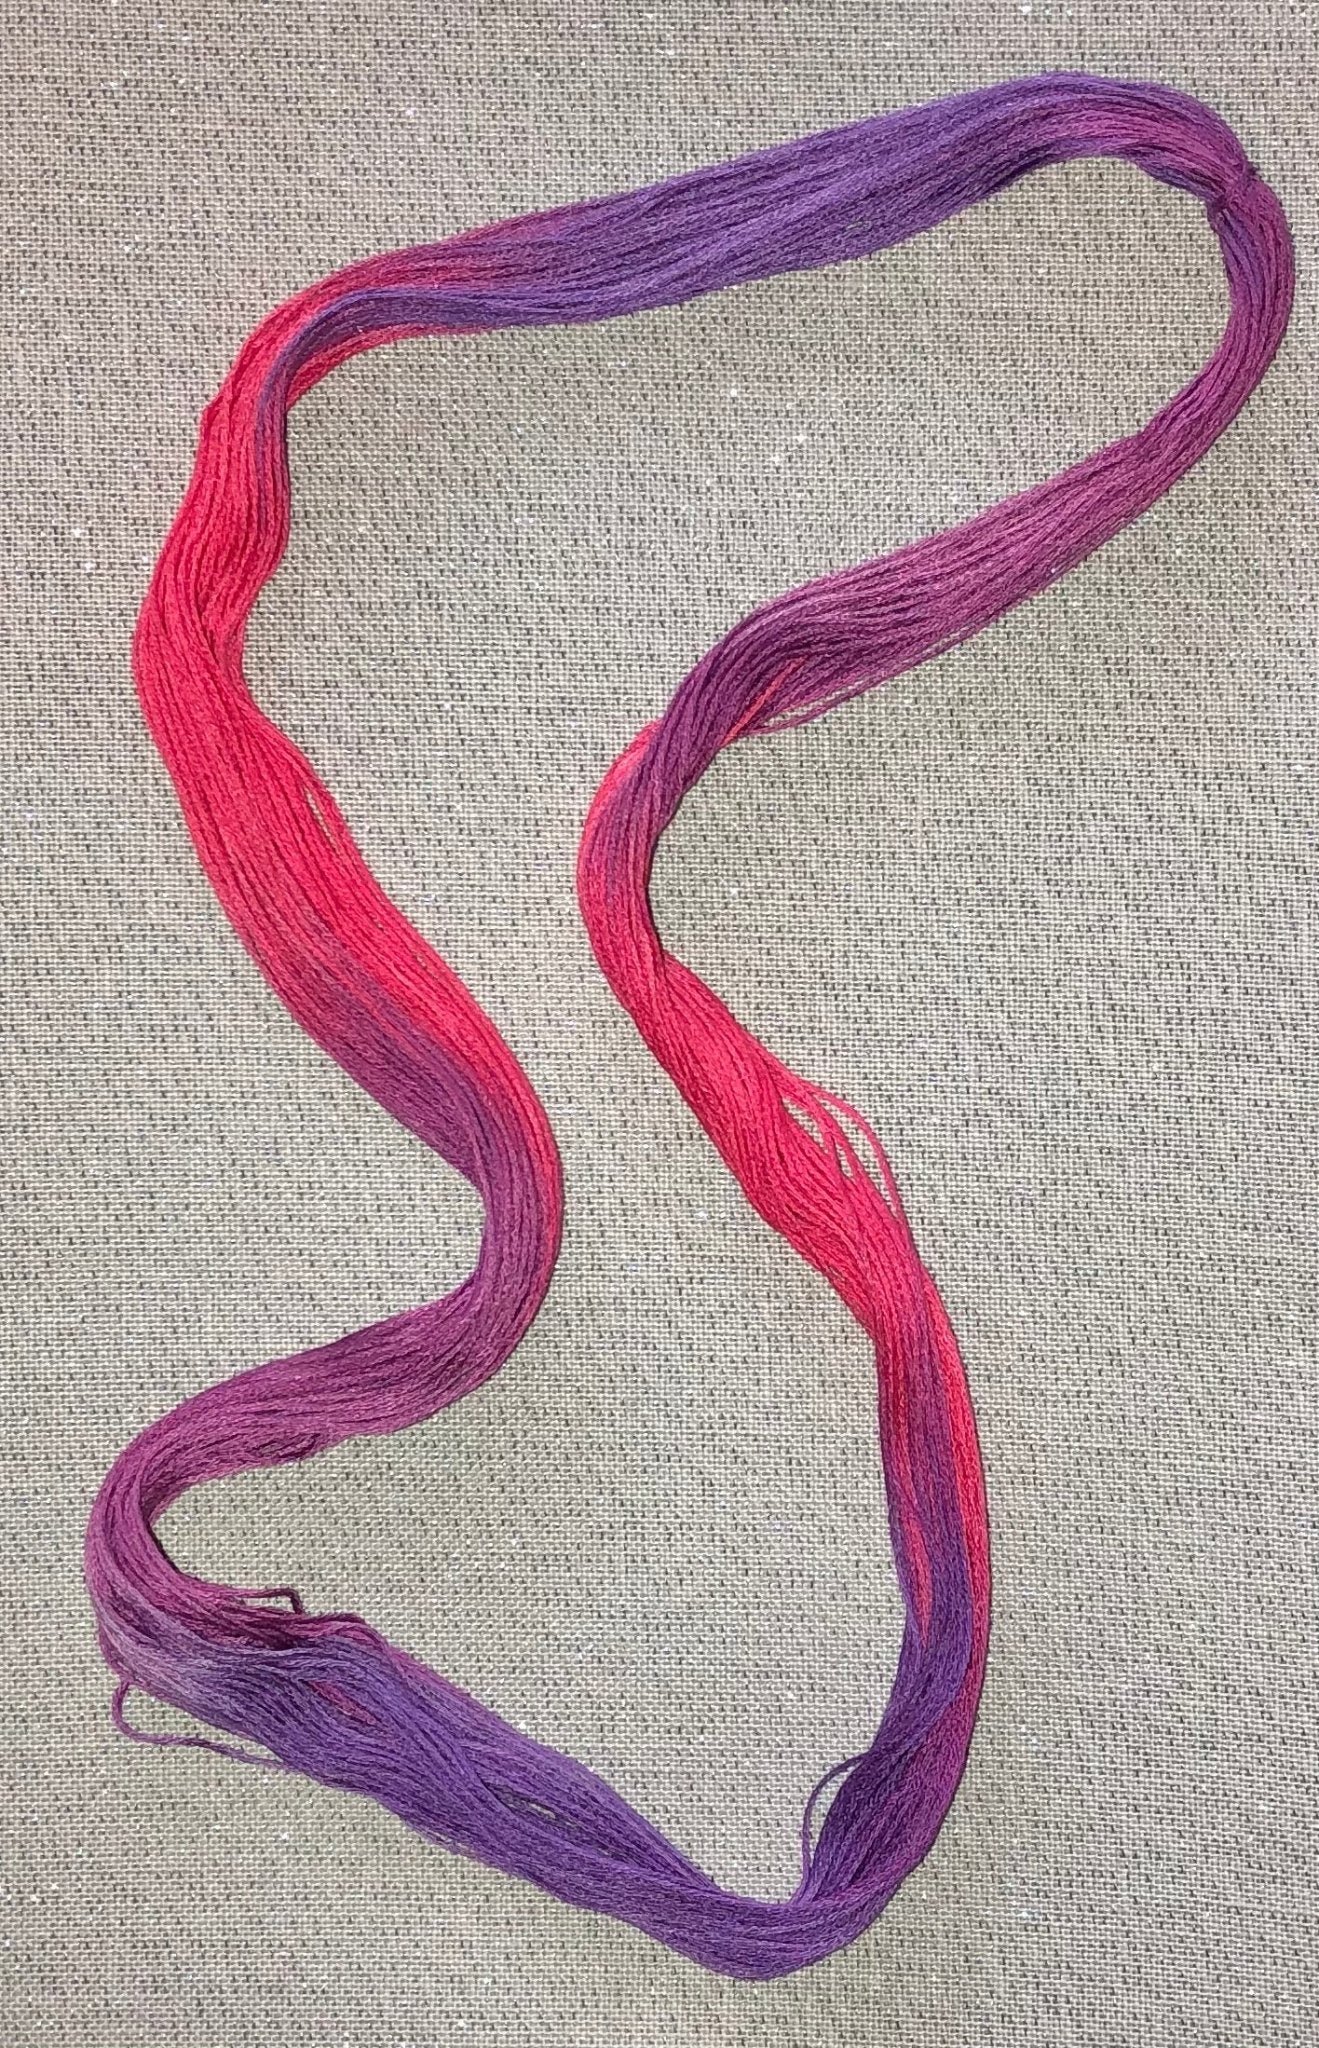 Silk hand dyed floss - Wild Berries - Dyeing for Cross Stitch